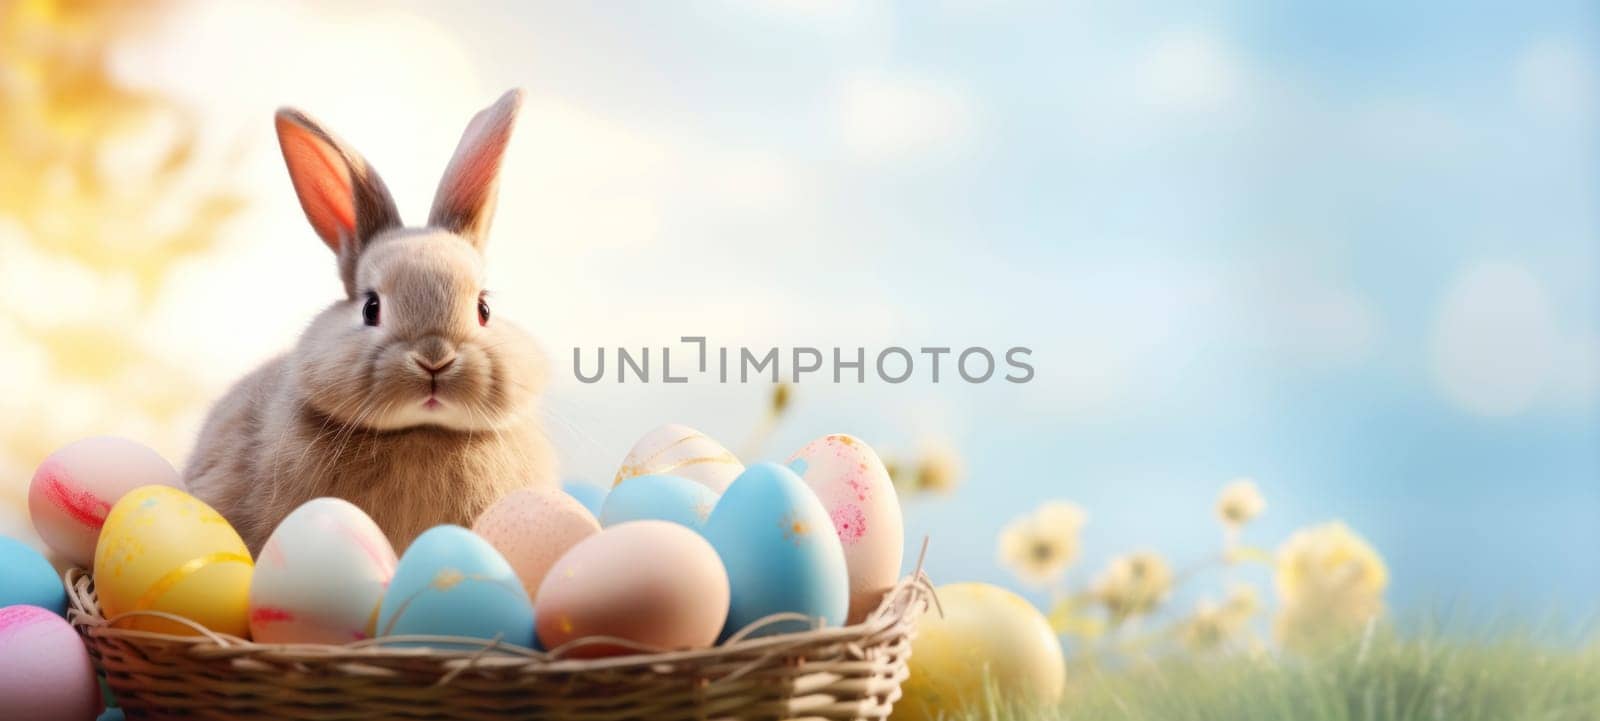 Easter Bunny with Colorful Eggs in Basket by andreyz